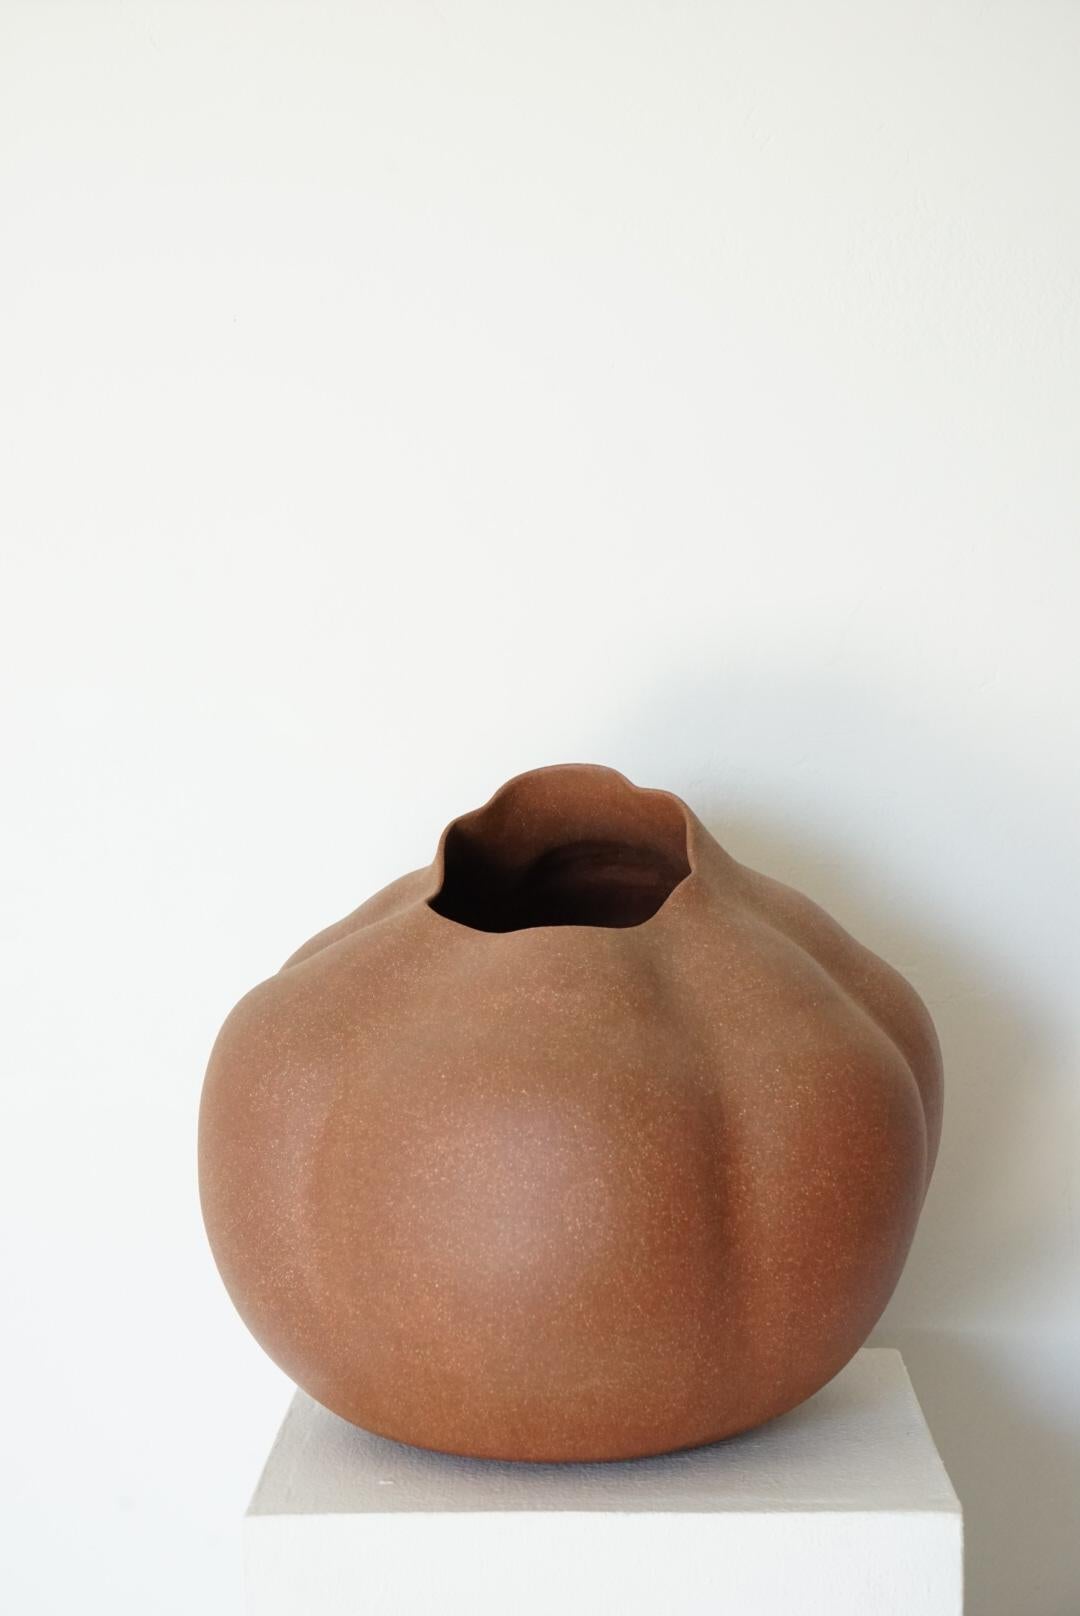 Fantastic Post Modern Studio Pottery Vase Vessel.

Acquired vessel from an incredible artist estate in Palm Springs, Vase is in excellent vintage condition and believed to be early 1980s. 

Vessel is sculptural and has a beautiful and impressive